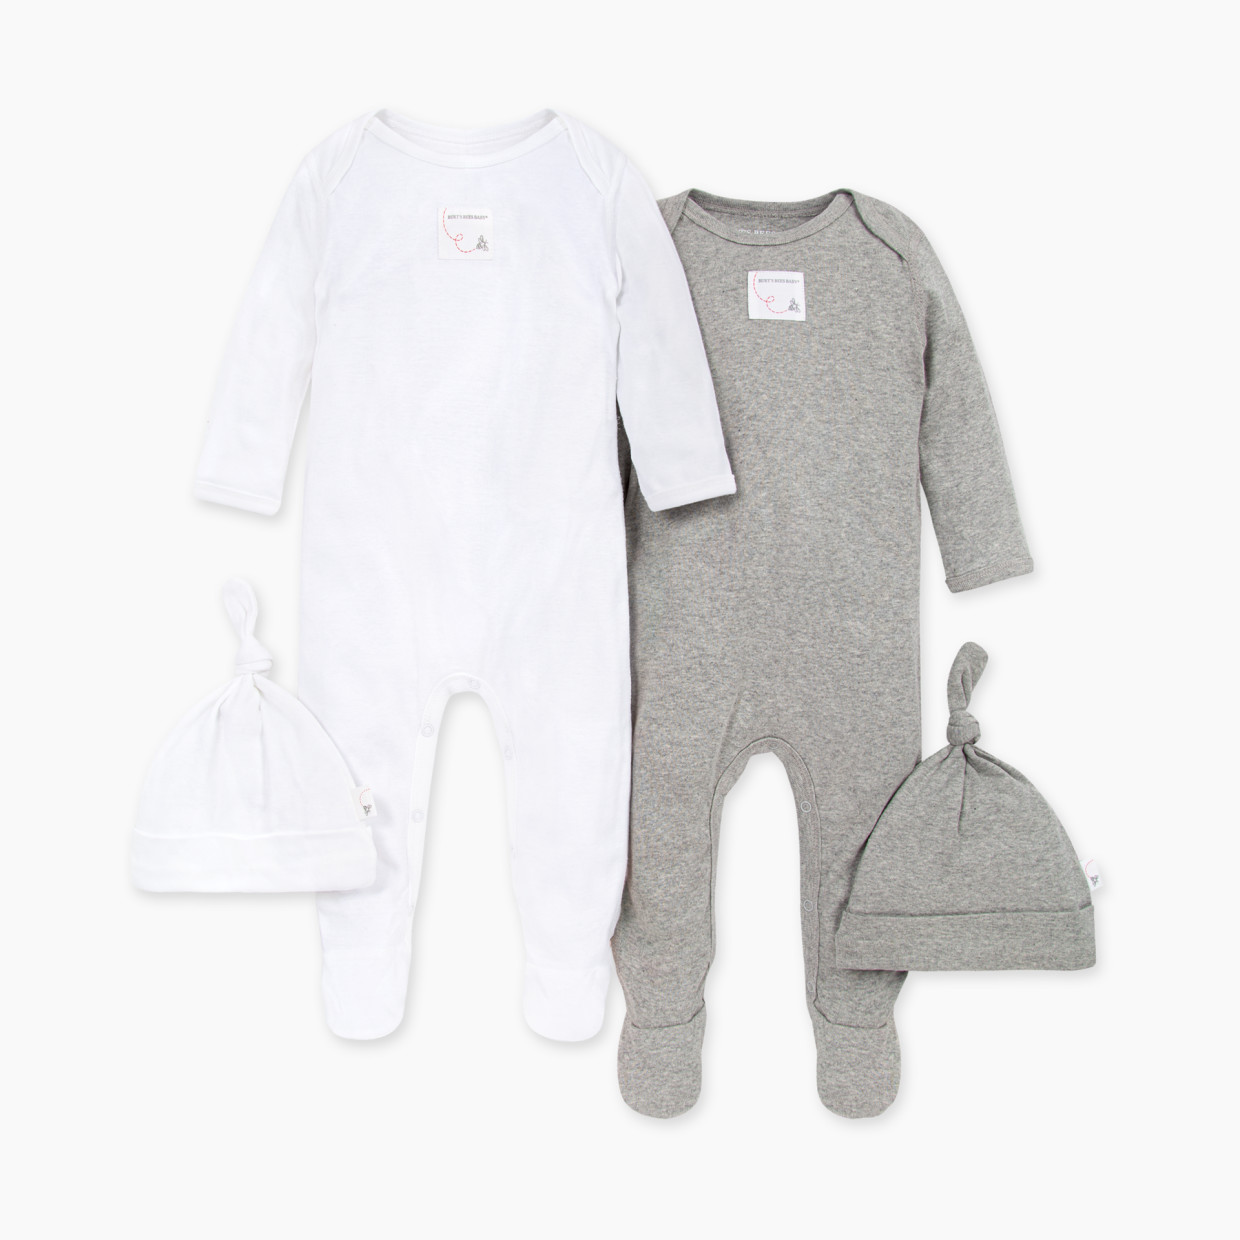 Burt's Bees Baby Organic Footed Coverall & Knot Top Hat (2 Pack) - Heather Grey/Cloud, 3-6 Months.